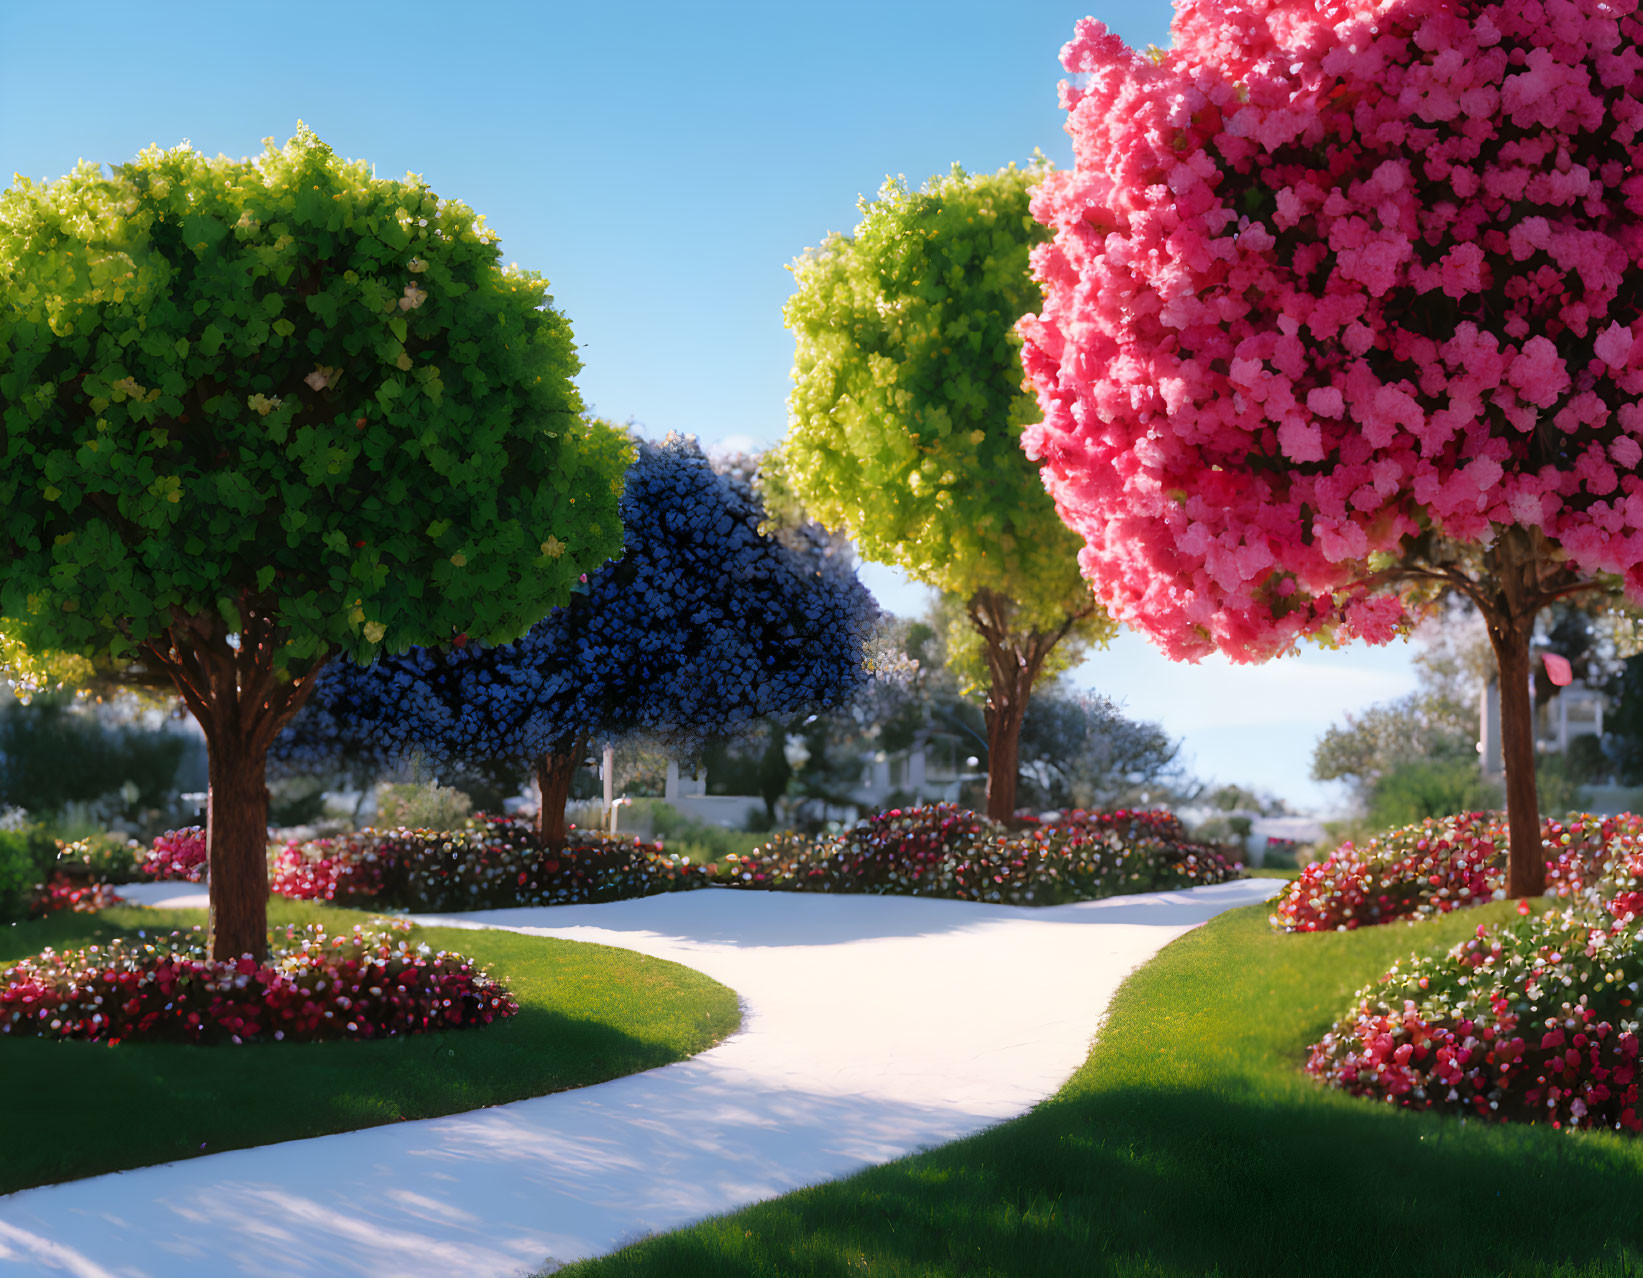 Scenic garden path with lush greenery and colorful blossoms